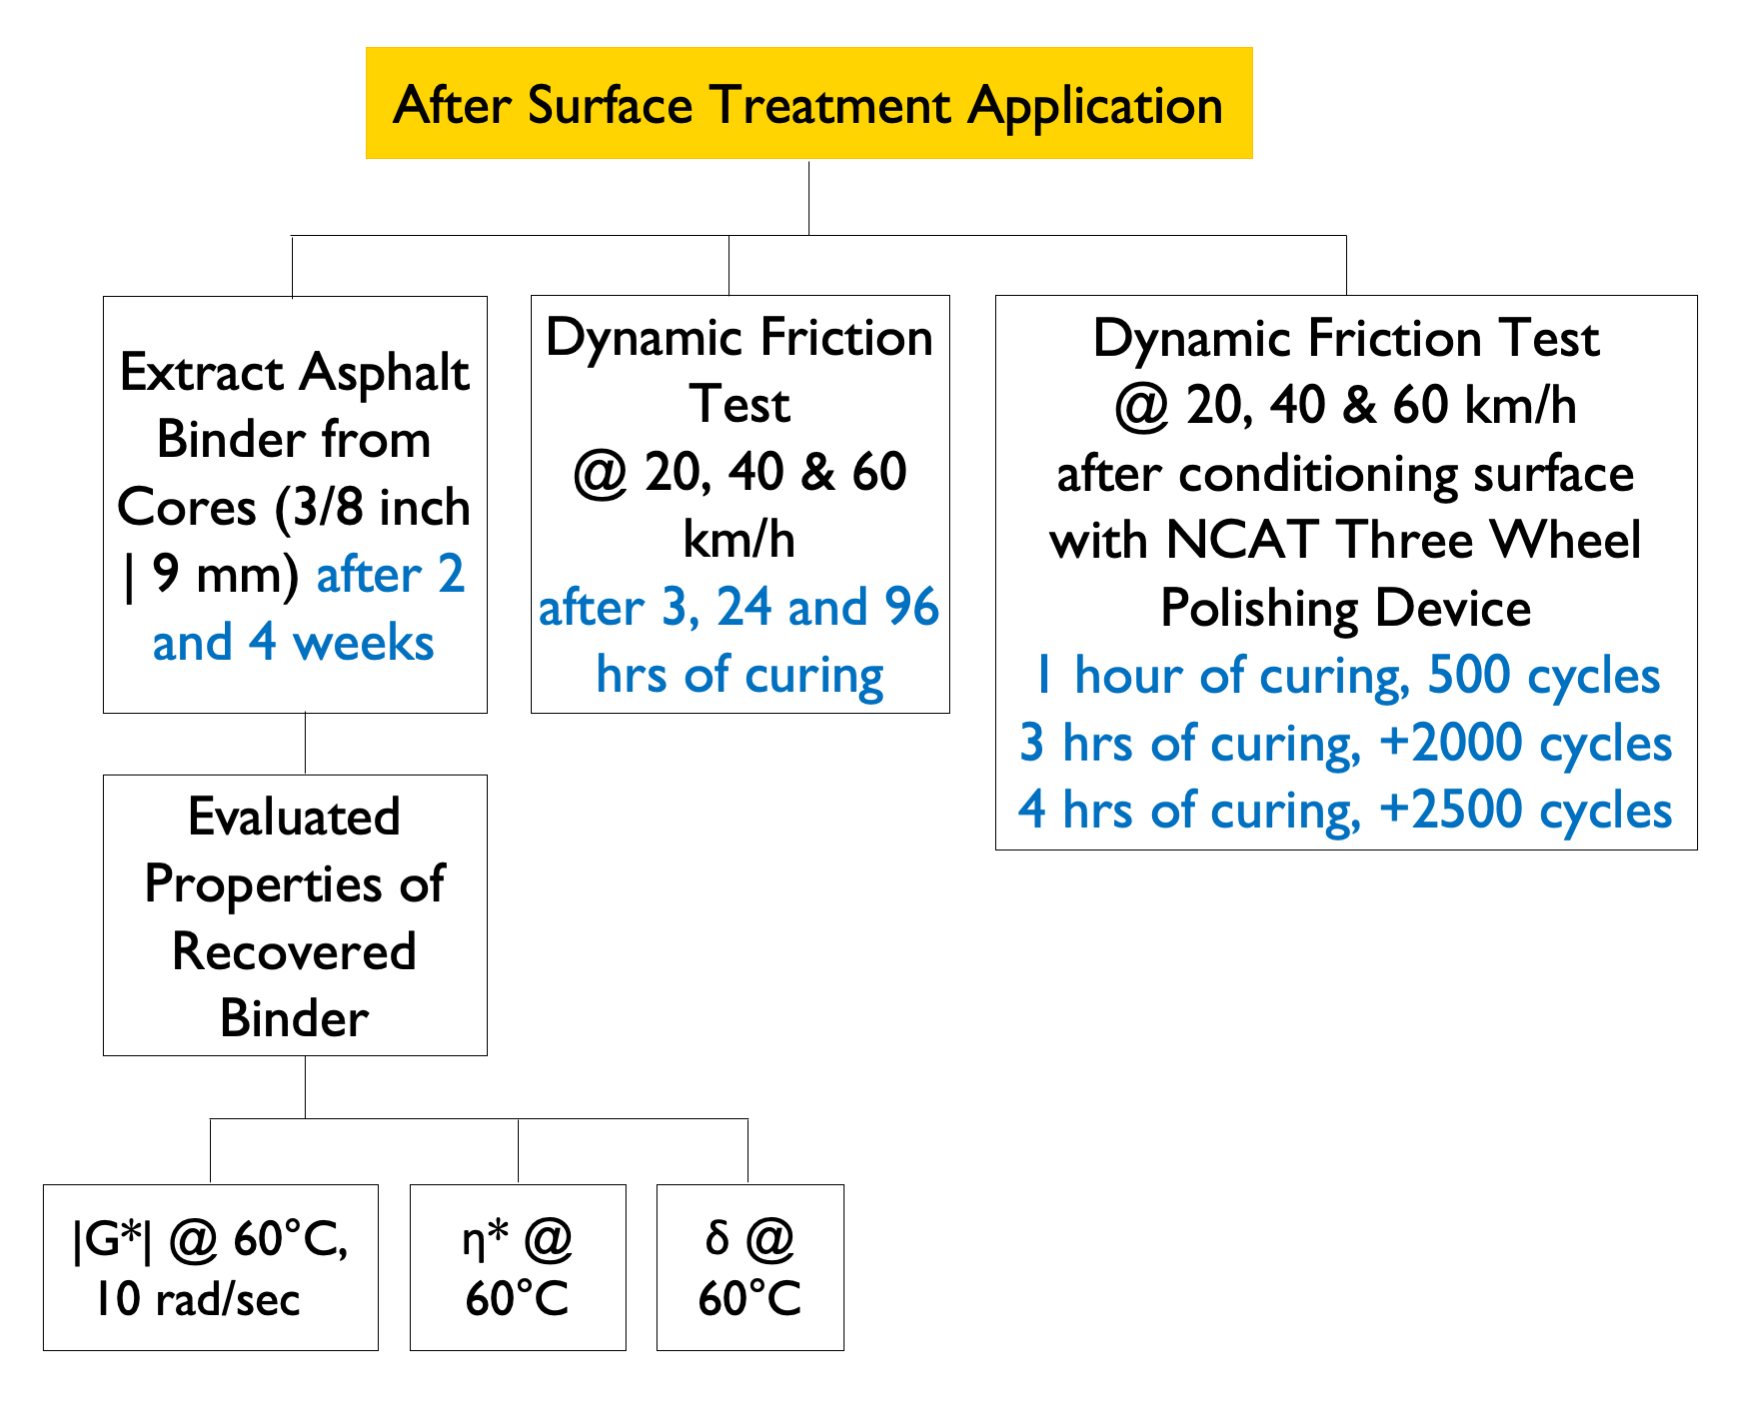 Figure 2. Testing matrix performed after application of the rejuvenating seal products.